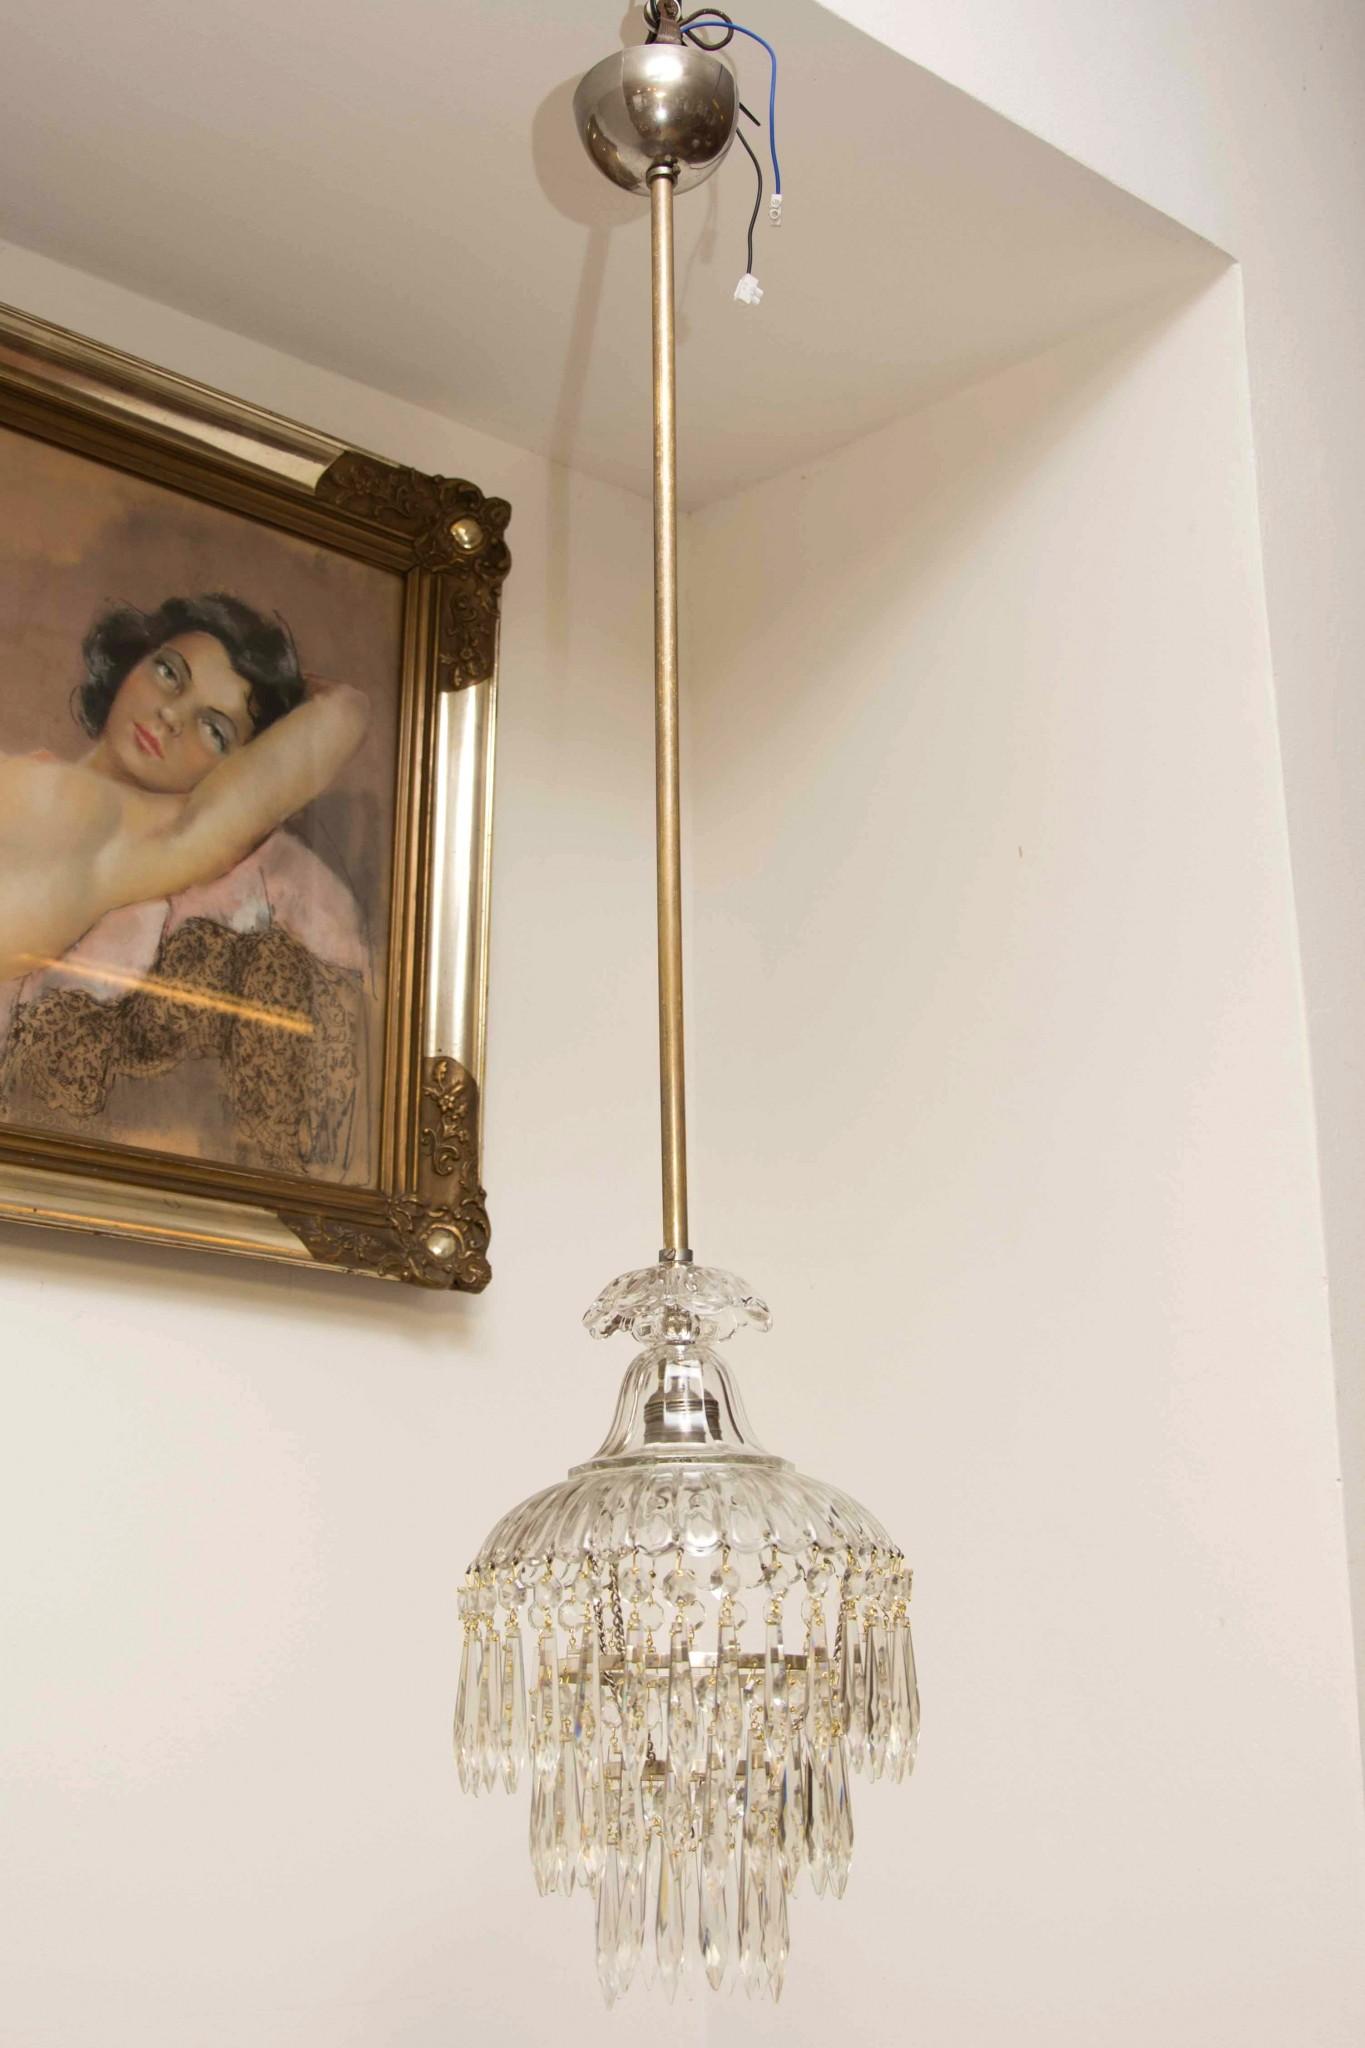 This crystal chandelier was made in the 1940s in the former Czechoslovakia. It has a new wiring. An excellent quality piece, it has a cut glass beads and pendants hanging from the brass centre. In very good Vintage condition, consistent with age and